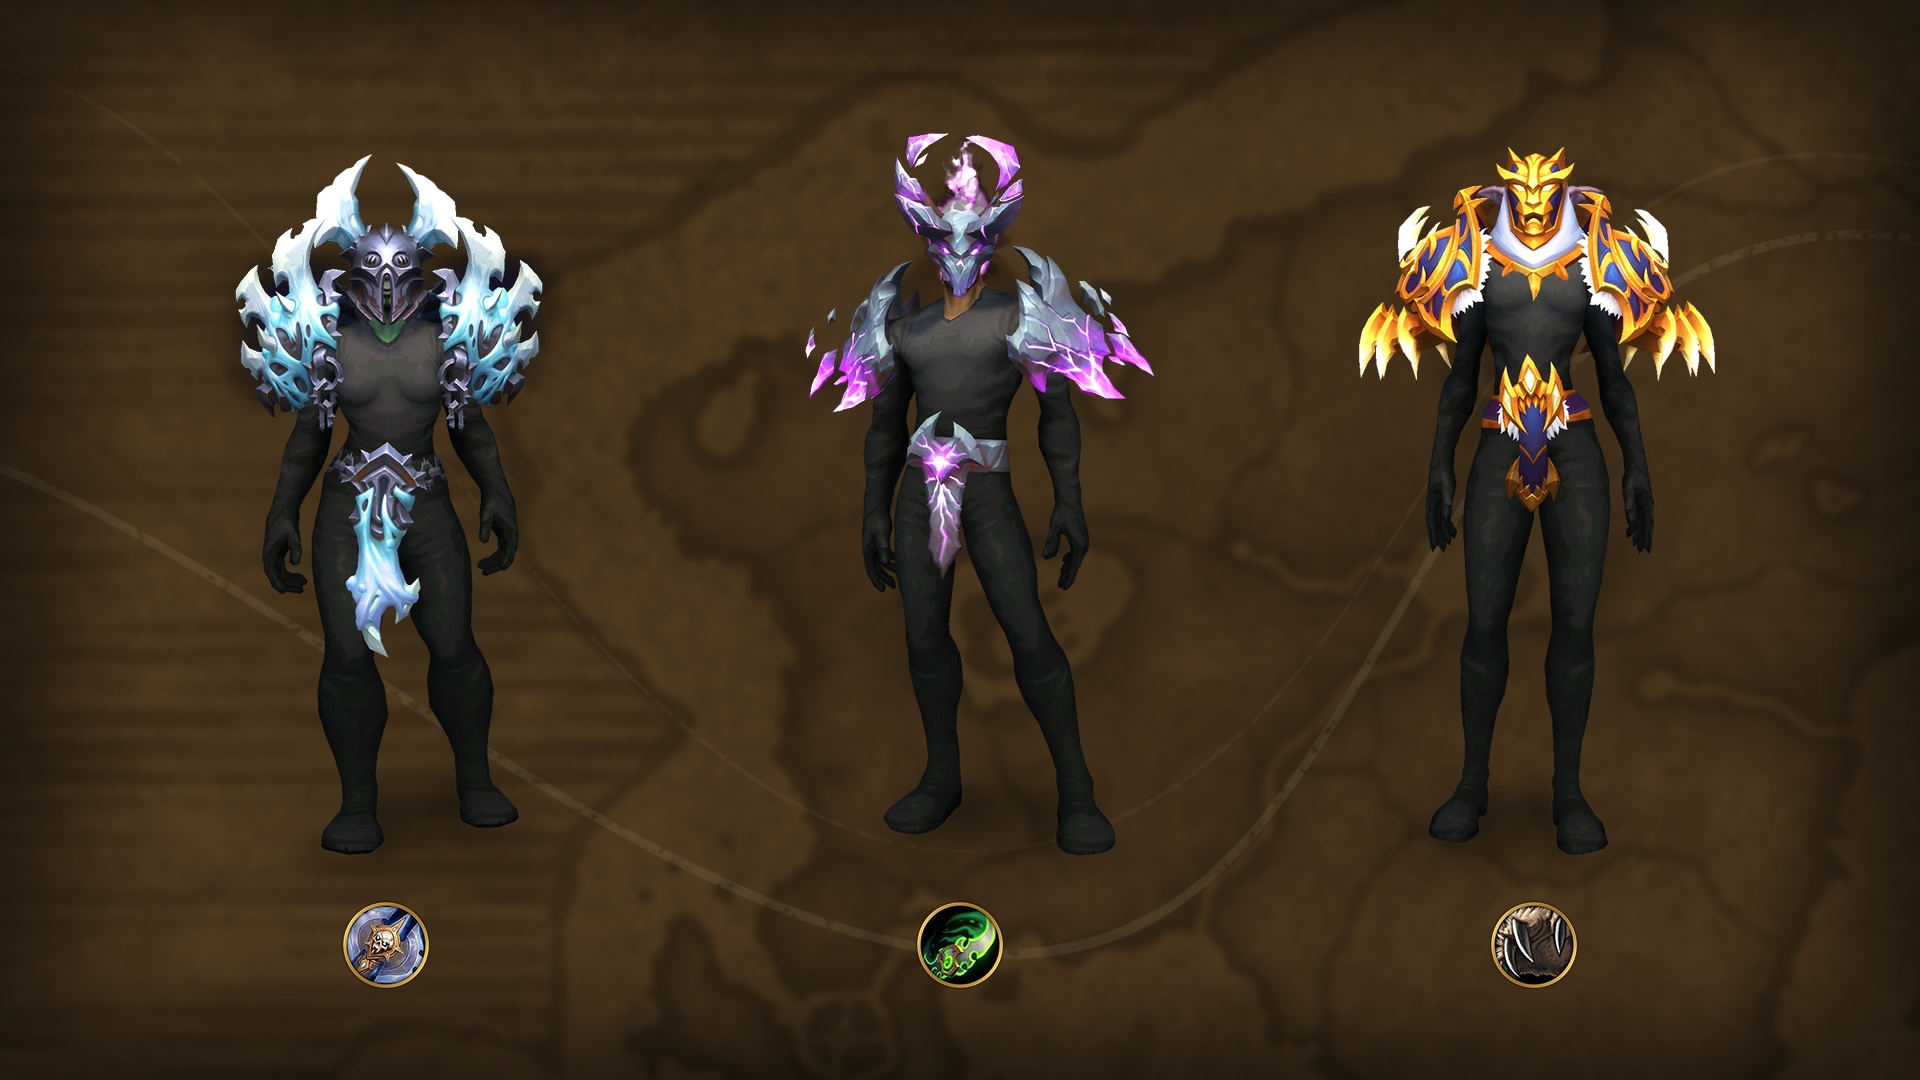 From left to right: Death Knight, Demon Hunter, Druid